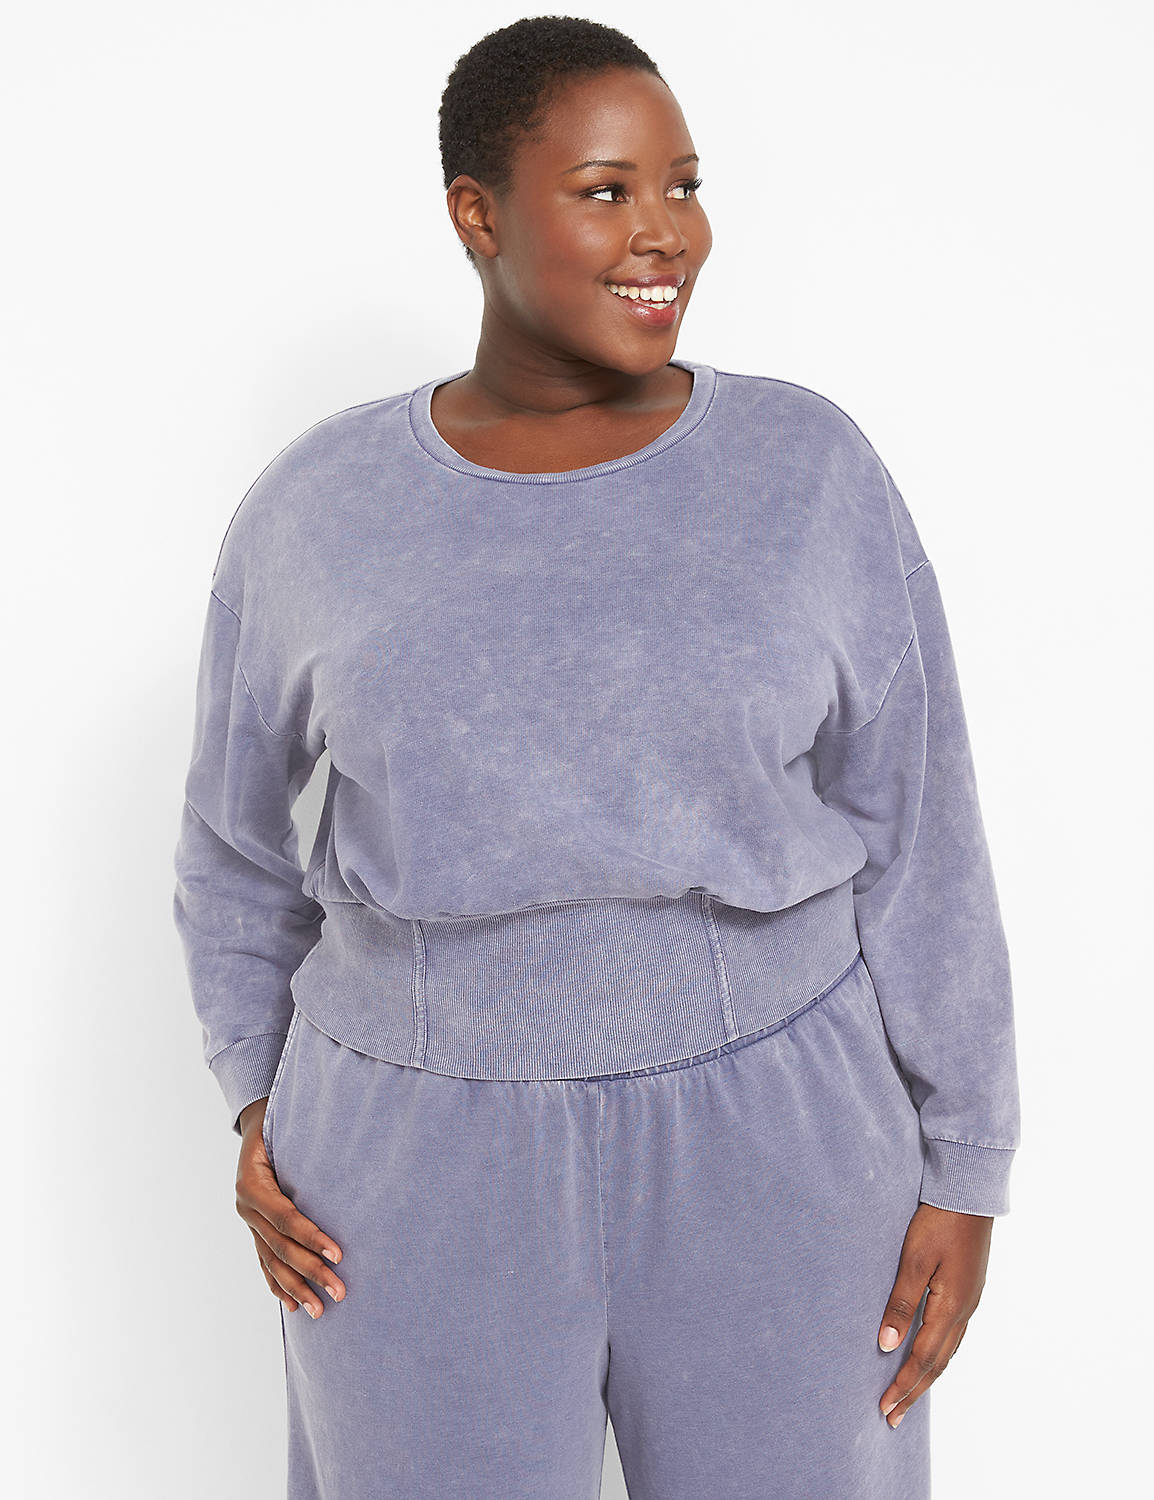 Long Sleeve Crew Neckline French Te Product Image 1